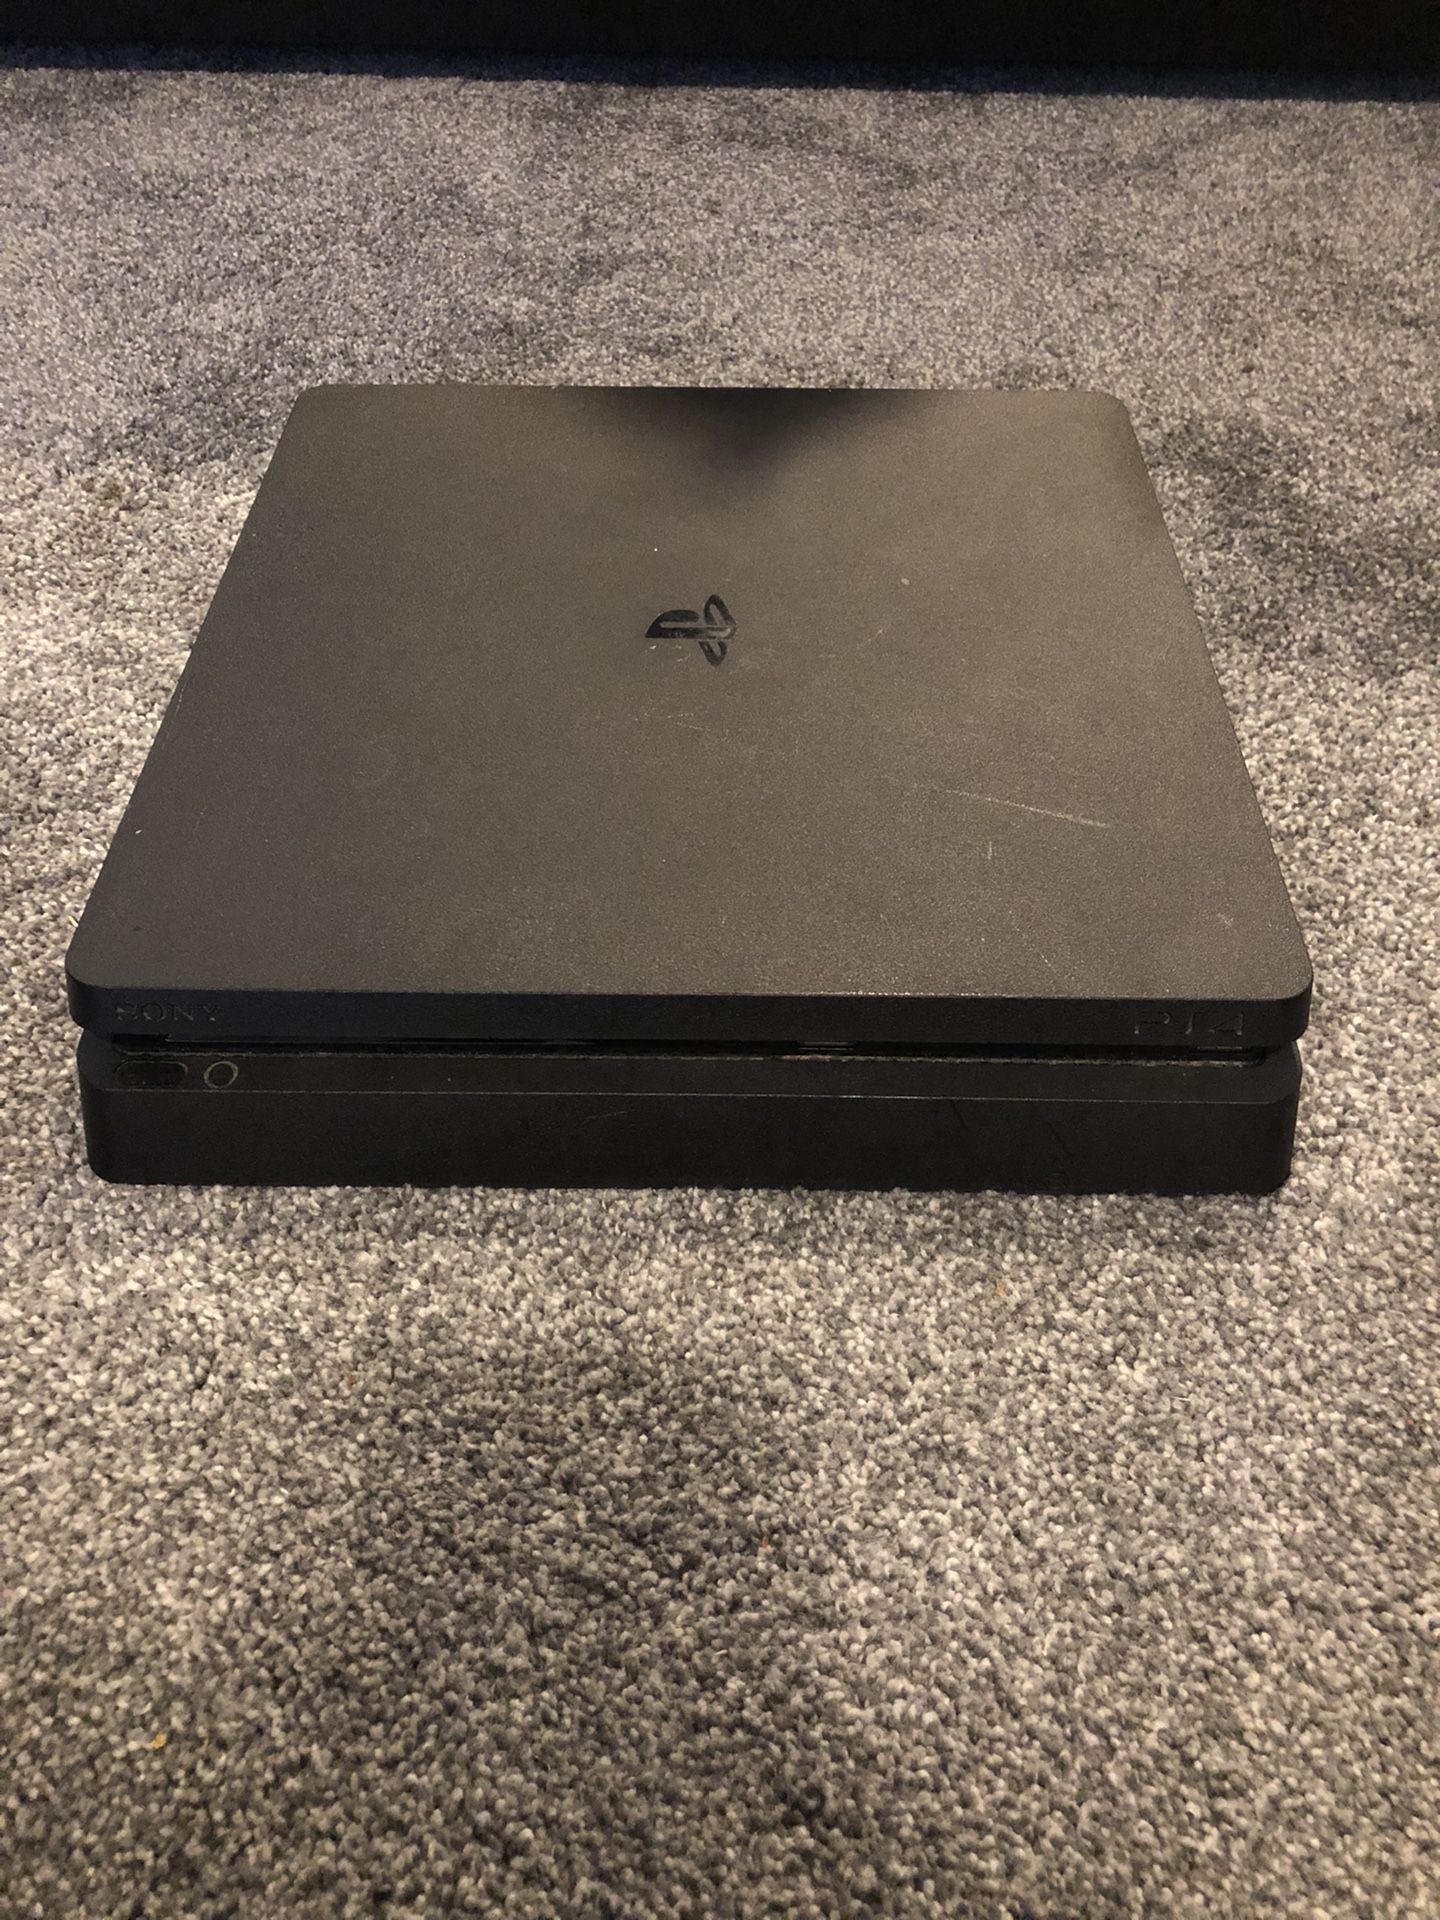 PS4 Slim w/ 3 Controllers and all Cables. NBA2k17 Included. 